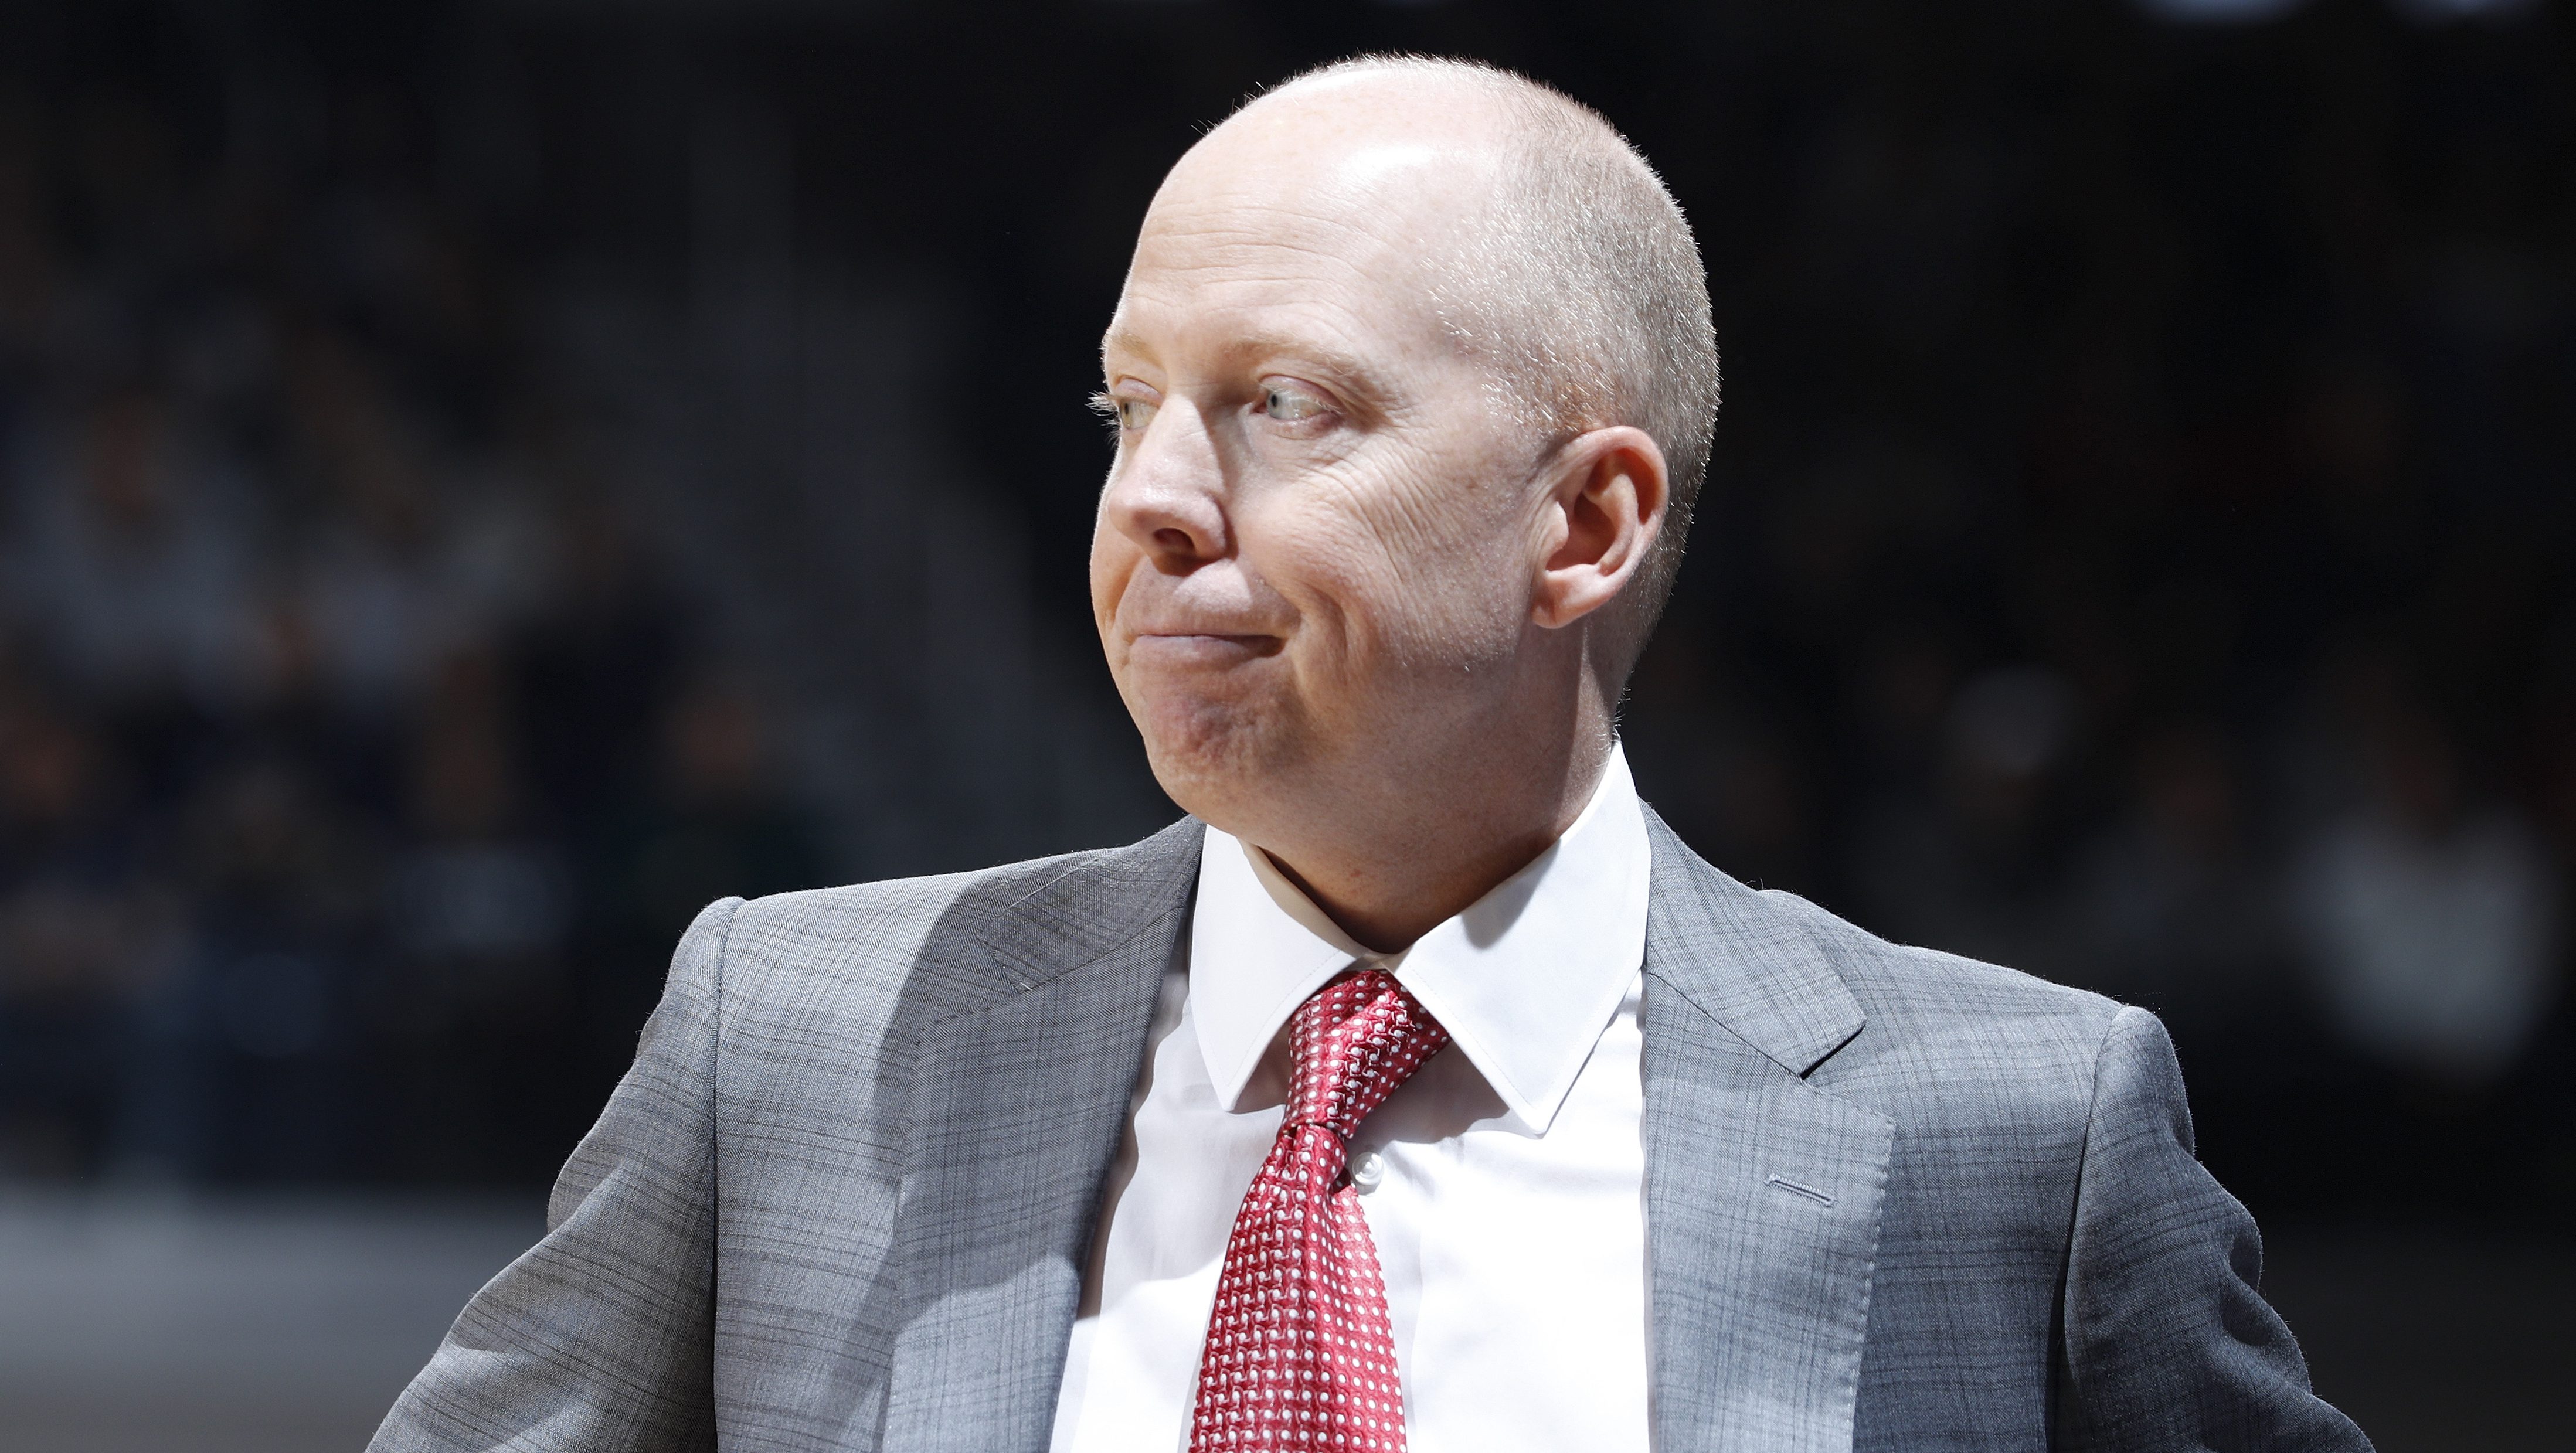 INDIANAPOLIS, IN - DECEMBER 10: Head coach Mick Cronin of the Cincinnati Bearcats reacts against the Butler Bulldogs in the first half of the game at Hinkle Fieldhouse on December 10, 2016 in Indianapolis, Indiana. (Photo by Joe Robbins/Getty Images)